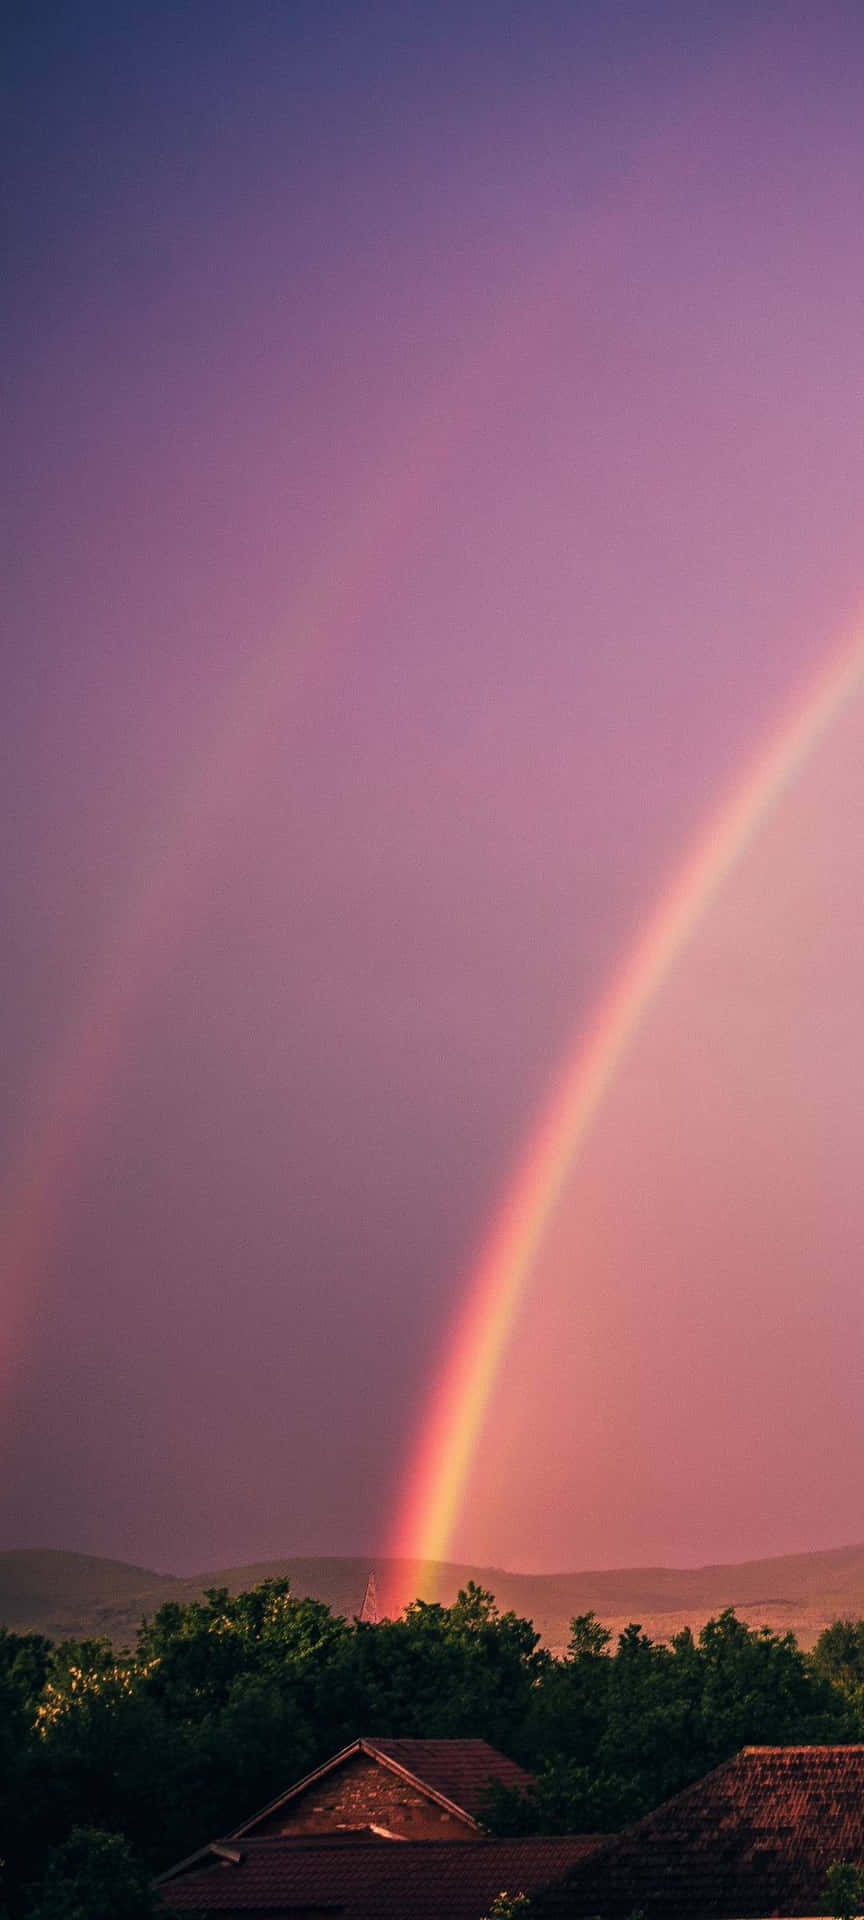 Captivating Spectrum Of Rainbow Against A Tranquil Sky